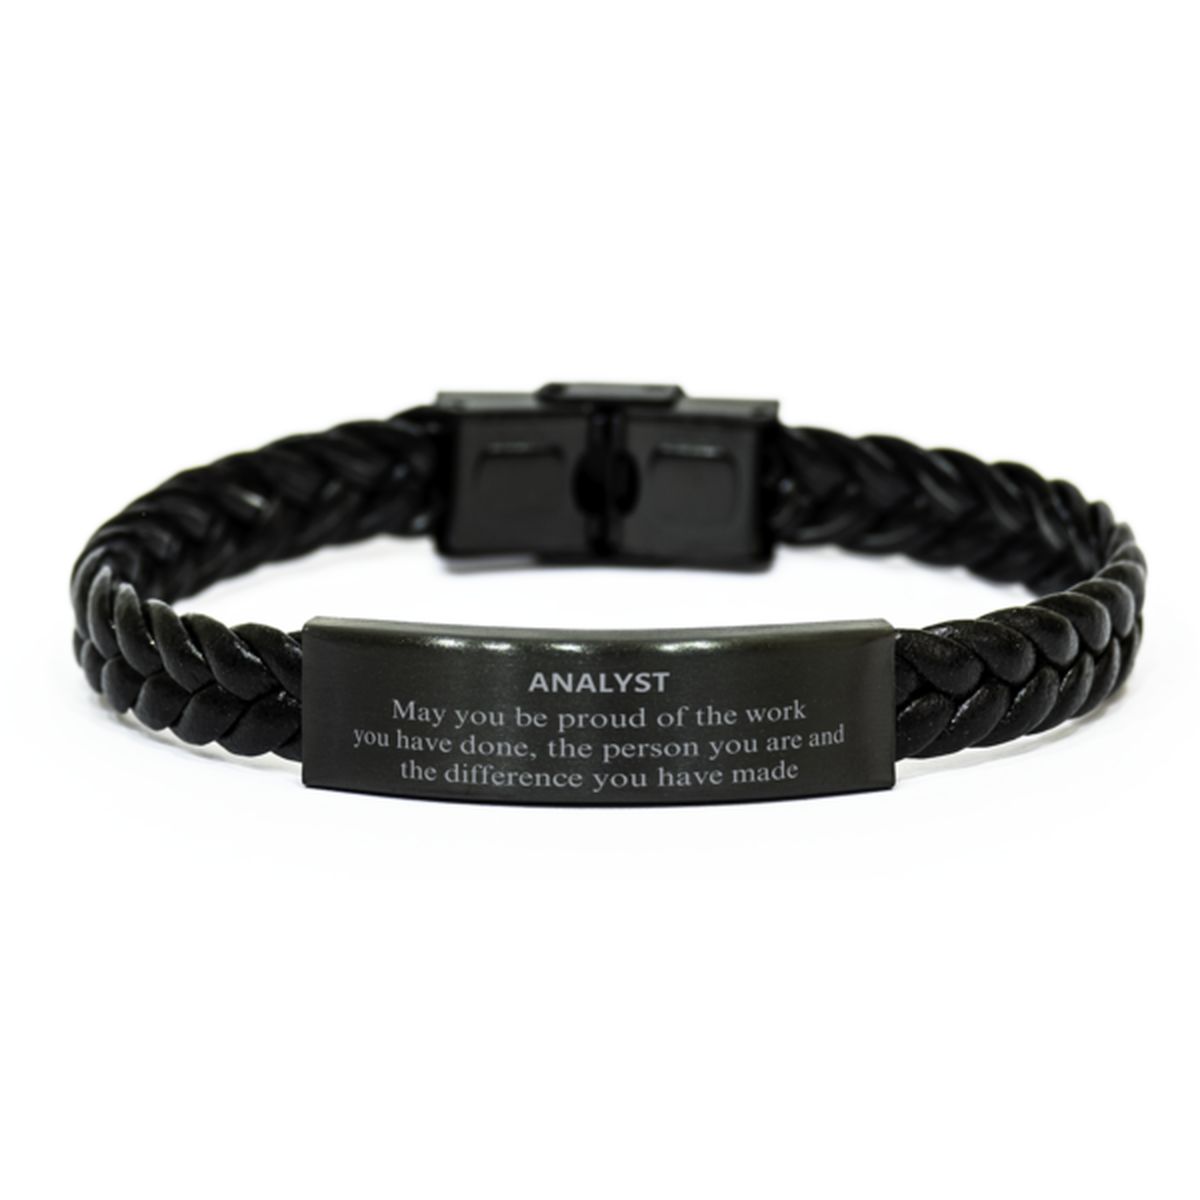 Analyst May you be proud of the work you have done, Retirement Analyst Braided Leather Bracelet for Colleague Appreciation Gifts Amazing for Analyst